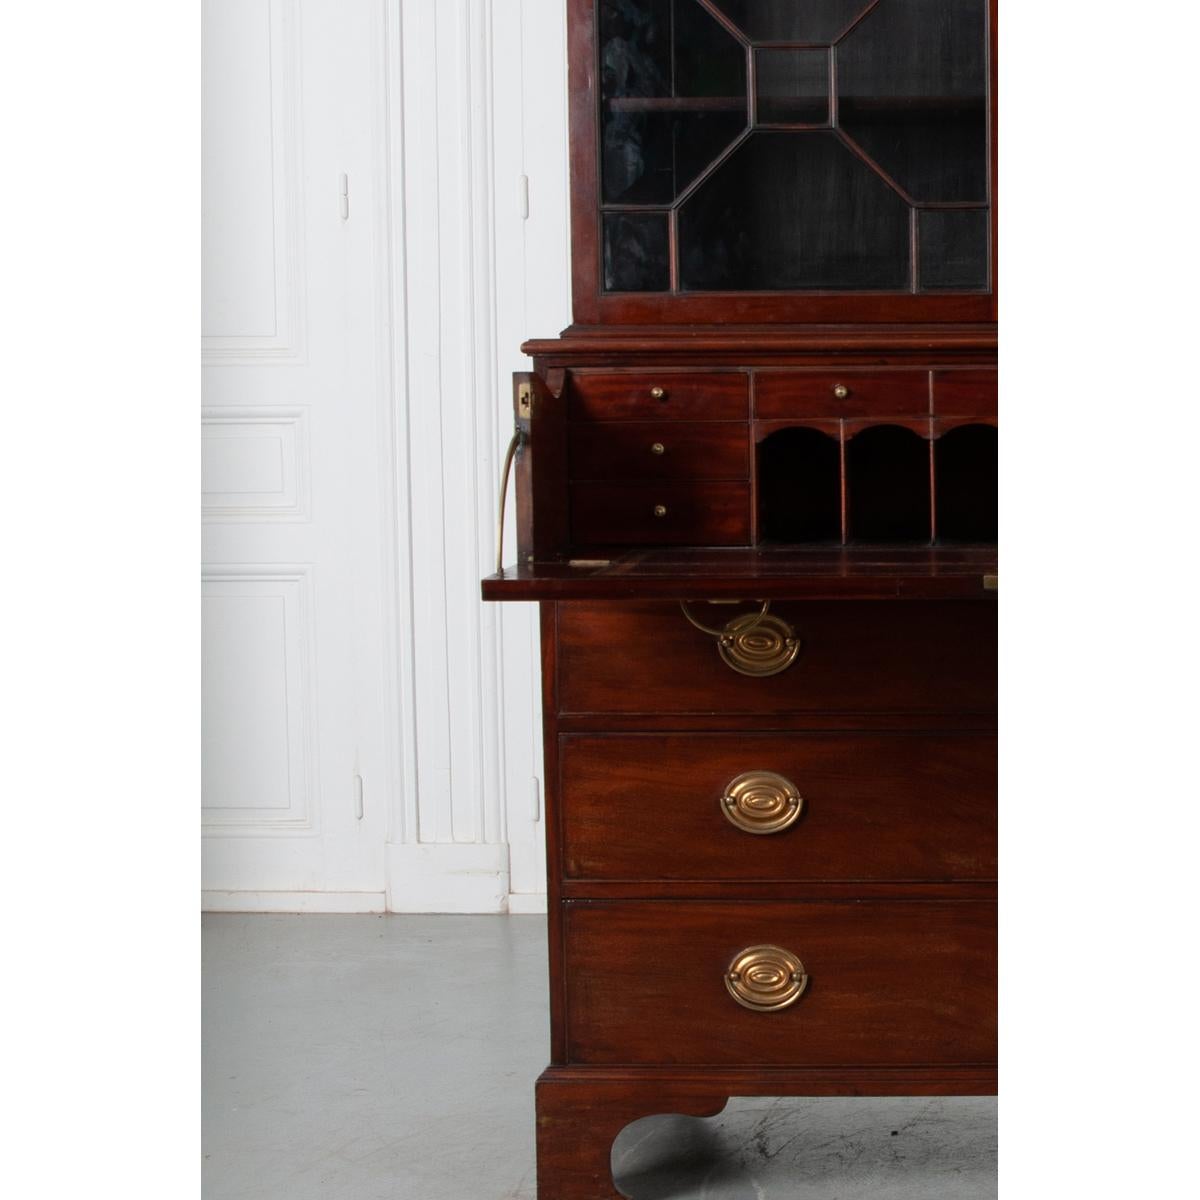 This handsome mahogany secretary from 19th century England is the perfect storage and display piece. The geometric paned glass top houses three adjustable shelves. The drop front desk hinges open to reveal a wonderfully patinated leather writing